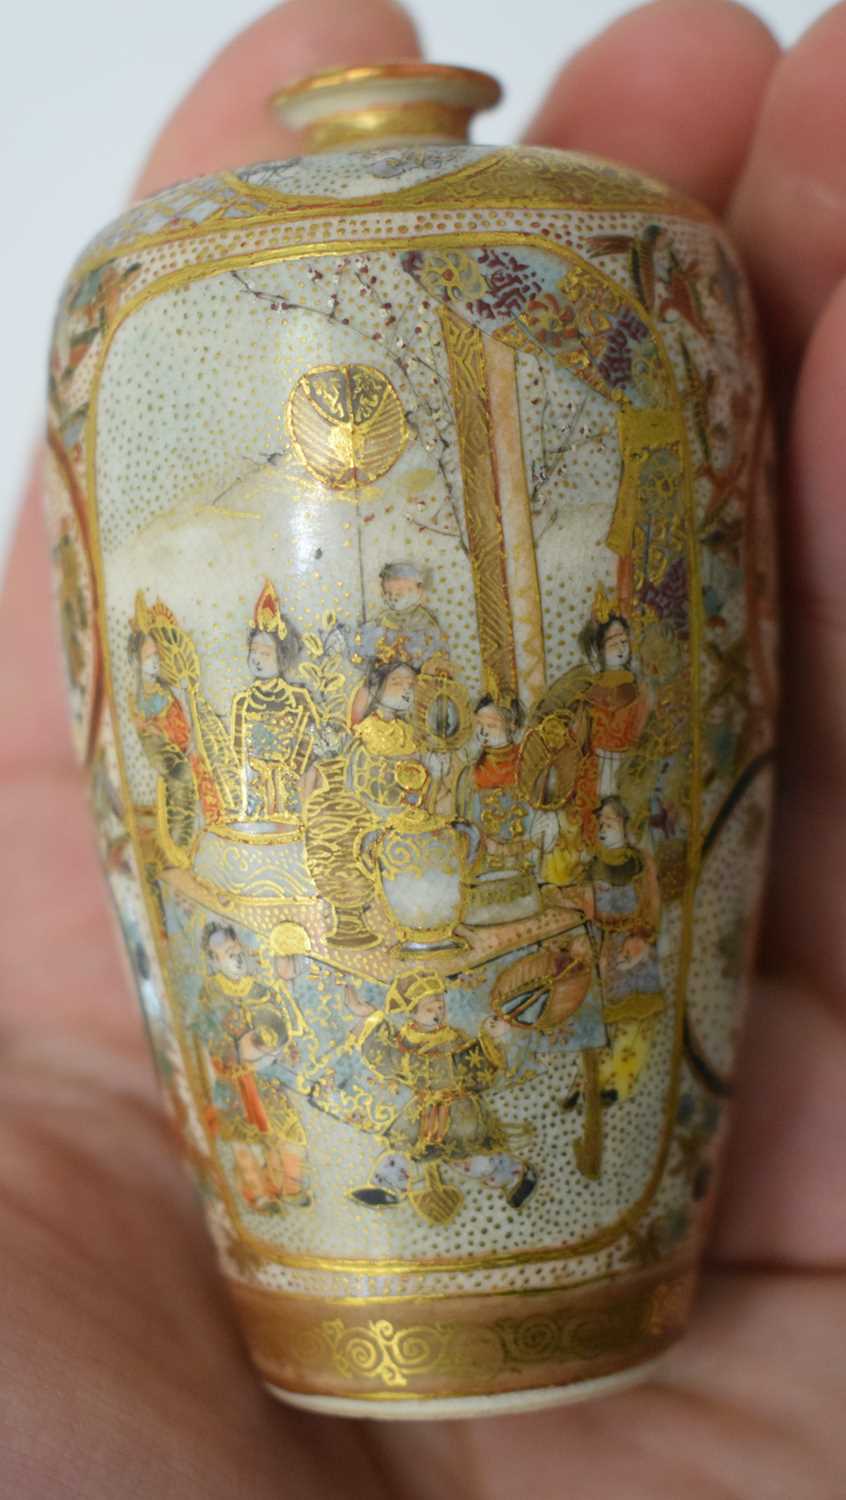 A SMALL 19TH CENTURY JAPANESE MEIJI PERIOD SATSUMA POTTERY VASE painted with figures and birds - Image 11 of 14